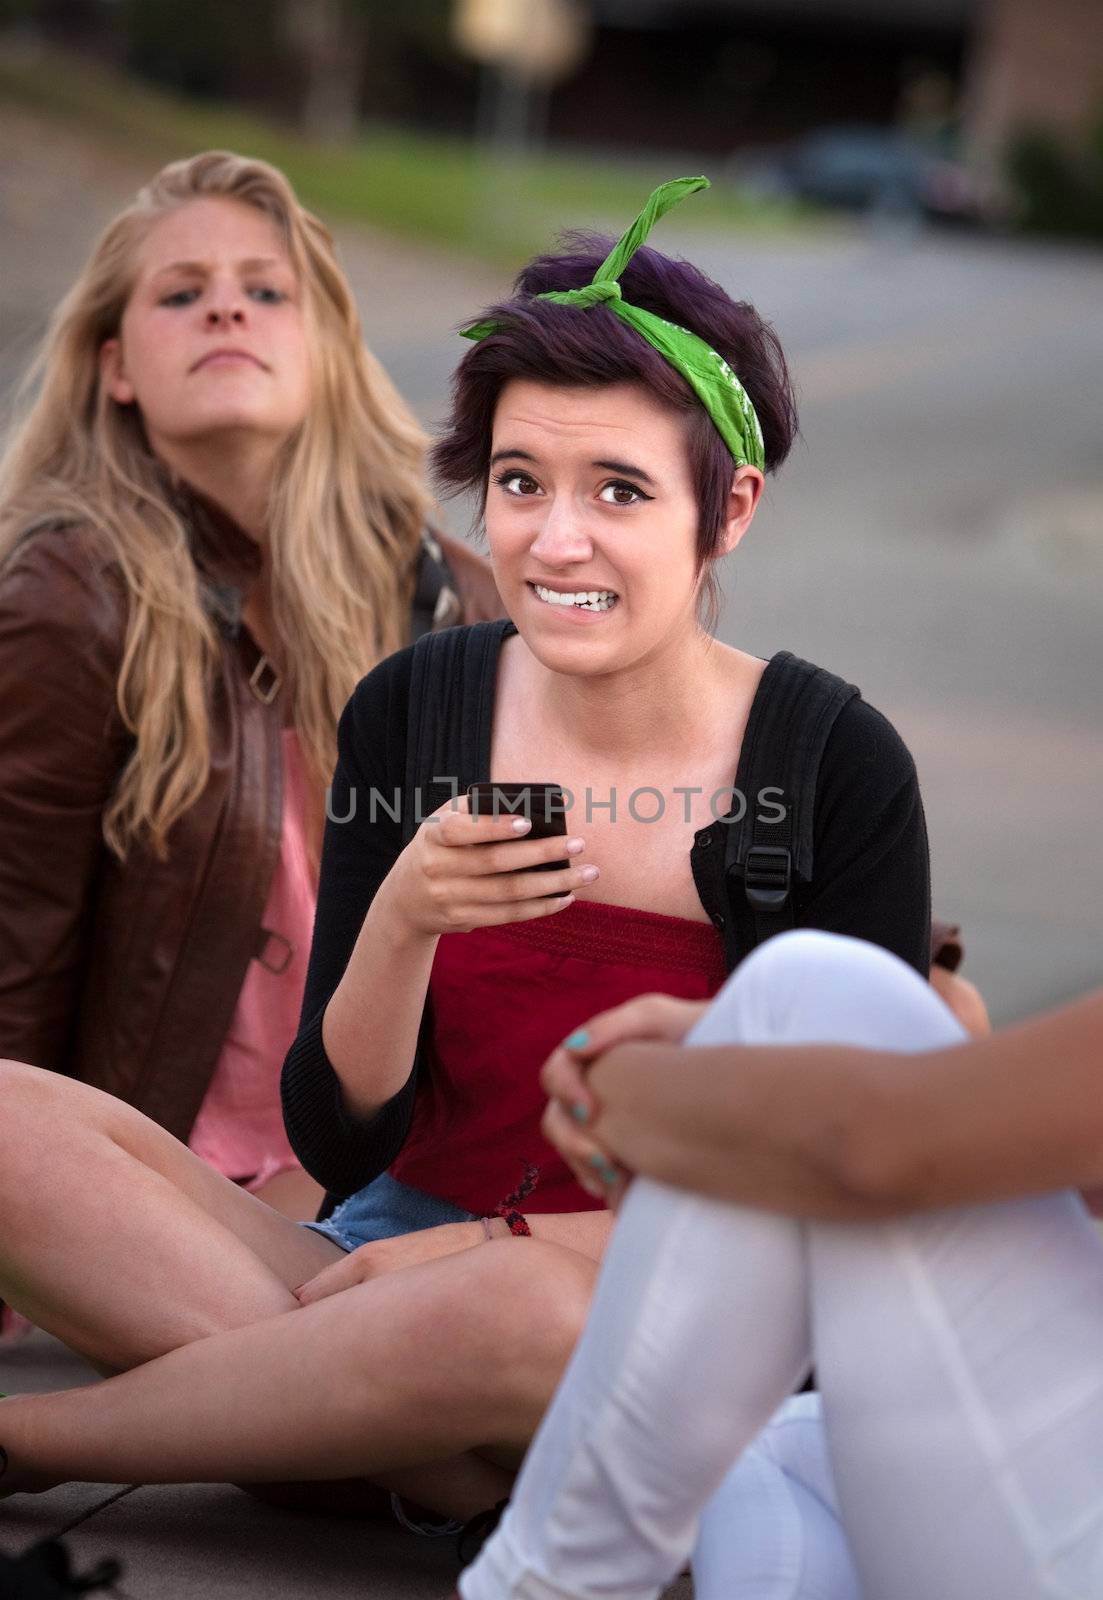 Embarrassed teenage girl holding phone outside with friends